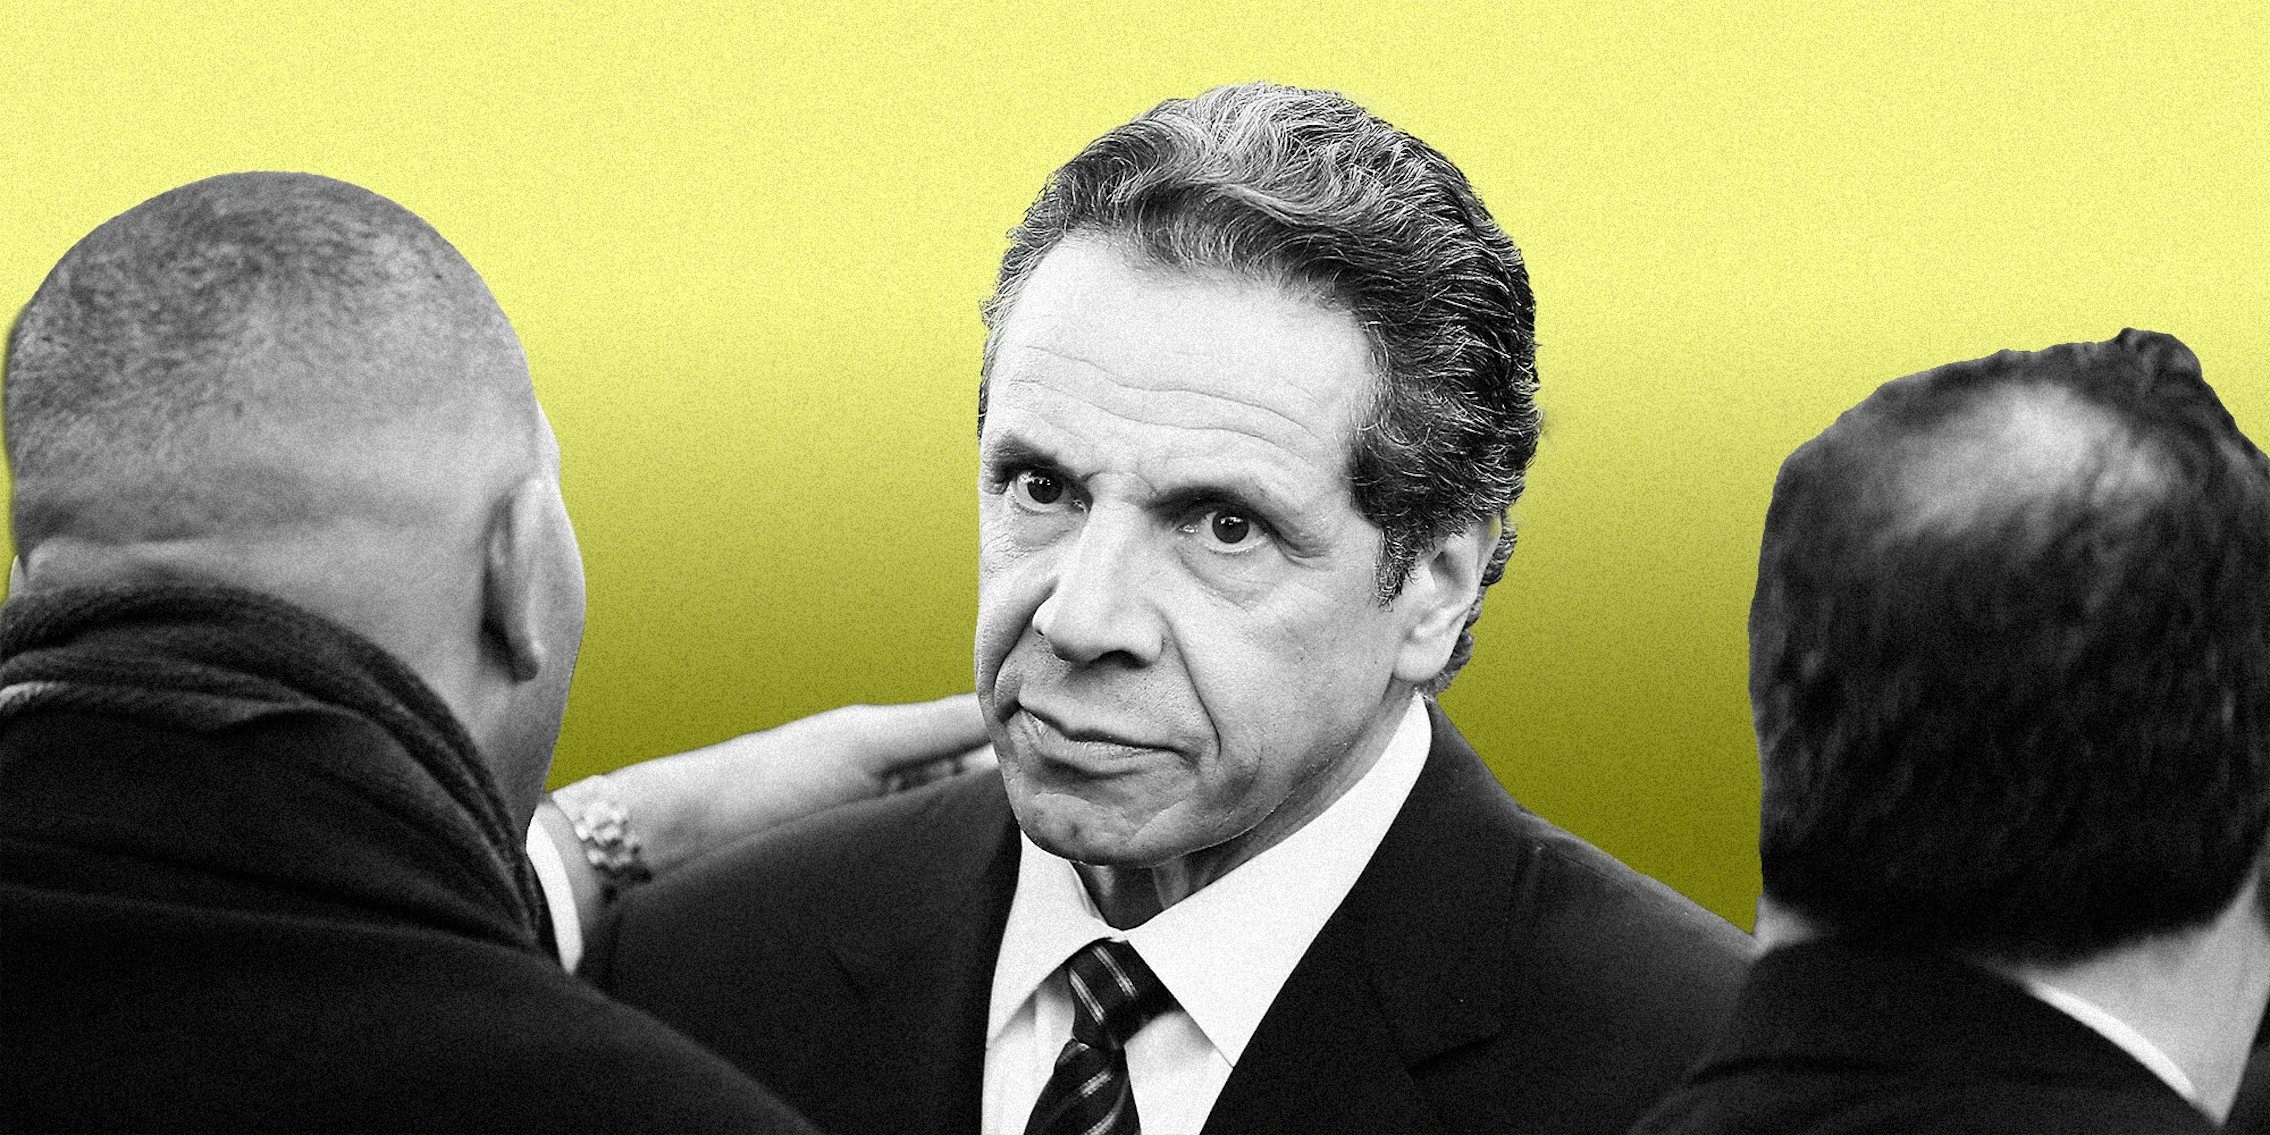 New York governor Andrew Cuomo on a yellow background.